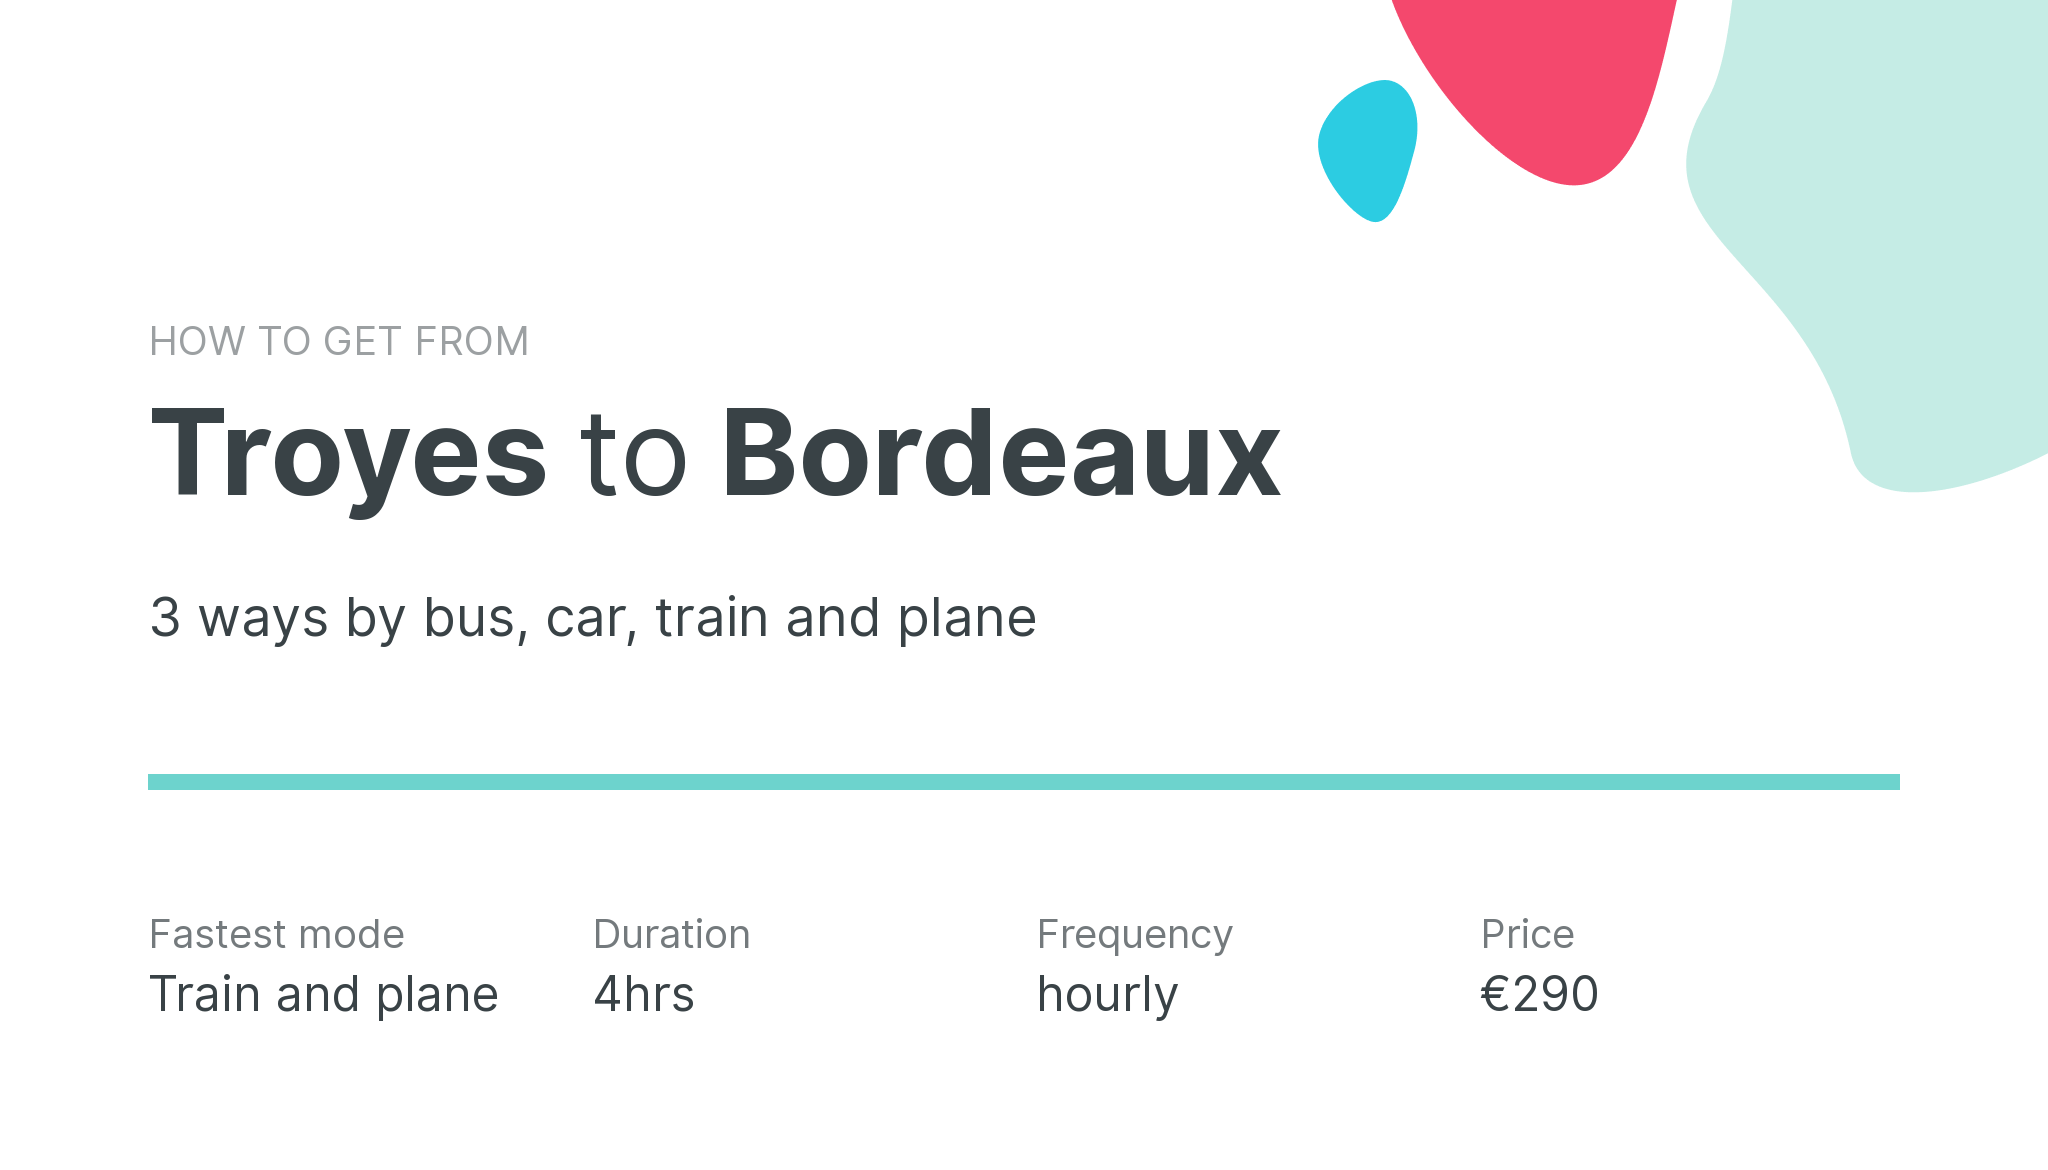 How do I get from Troyes to Bordeaux